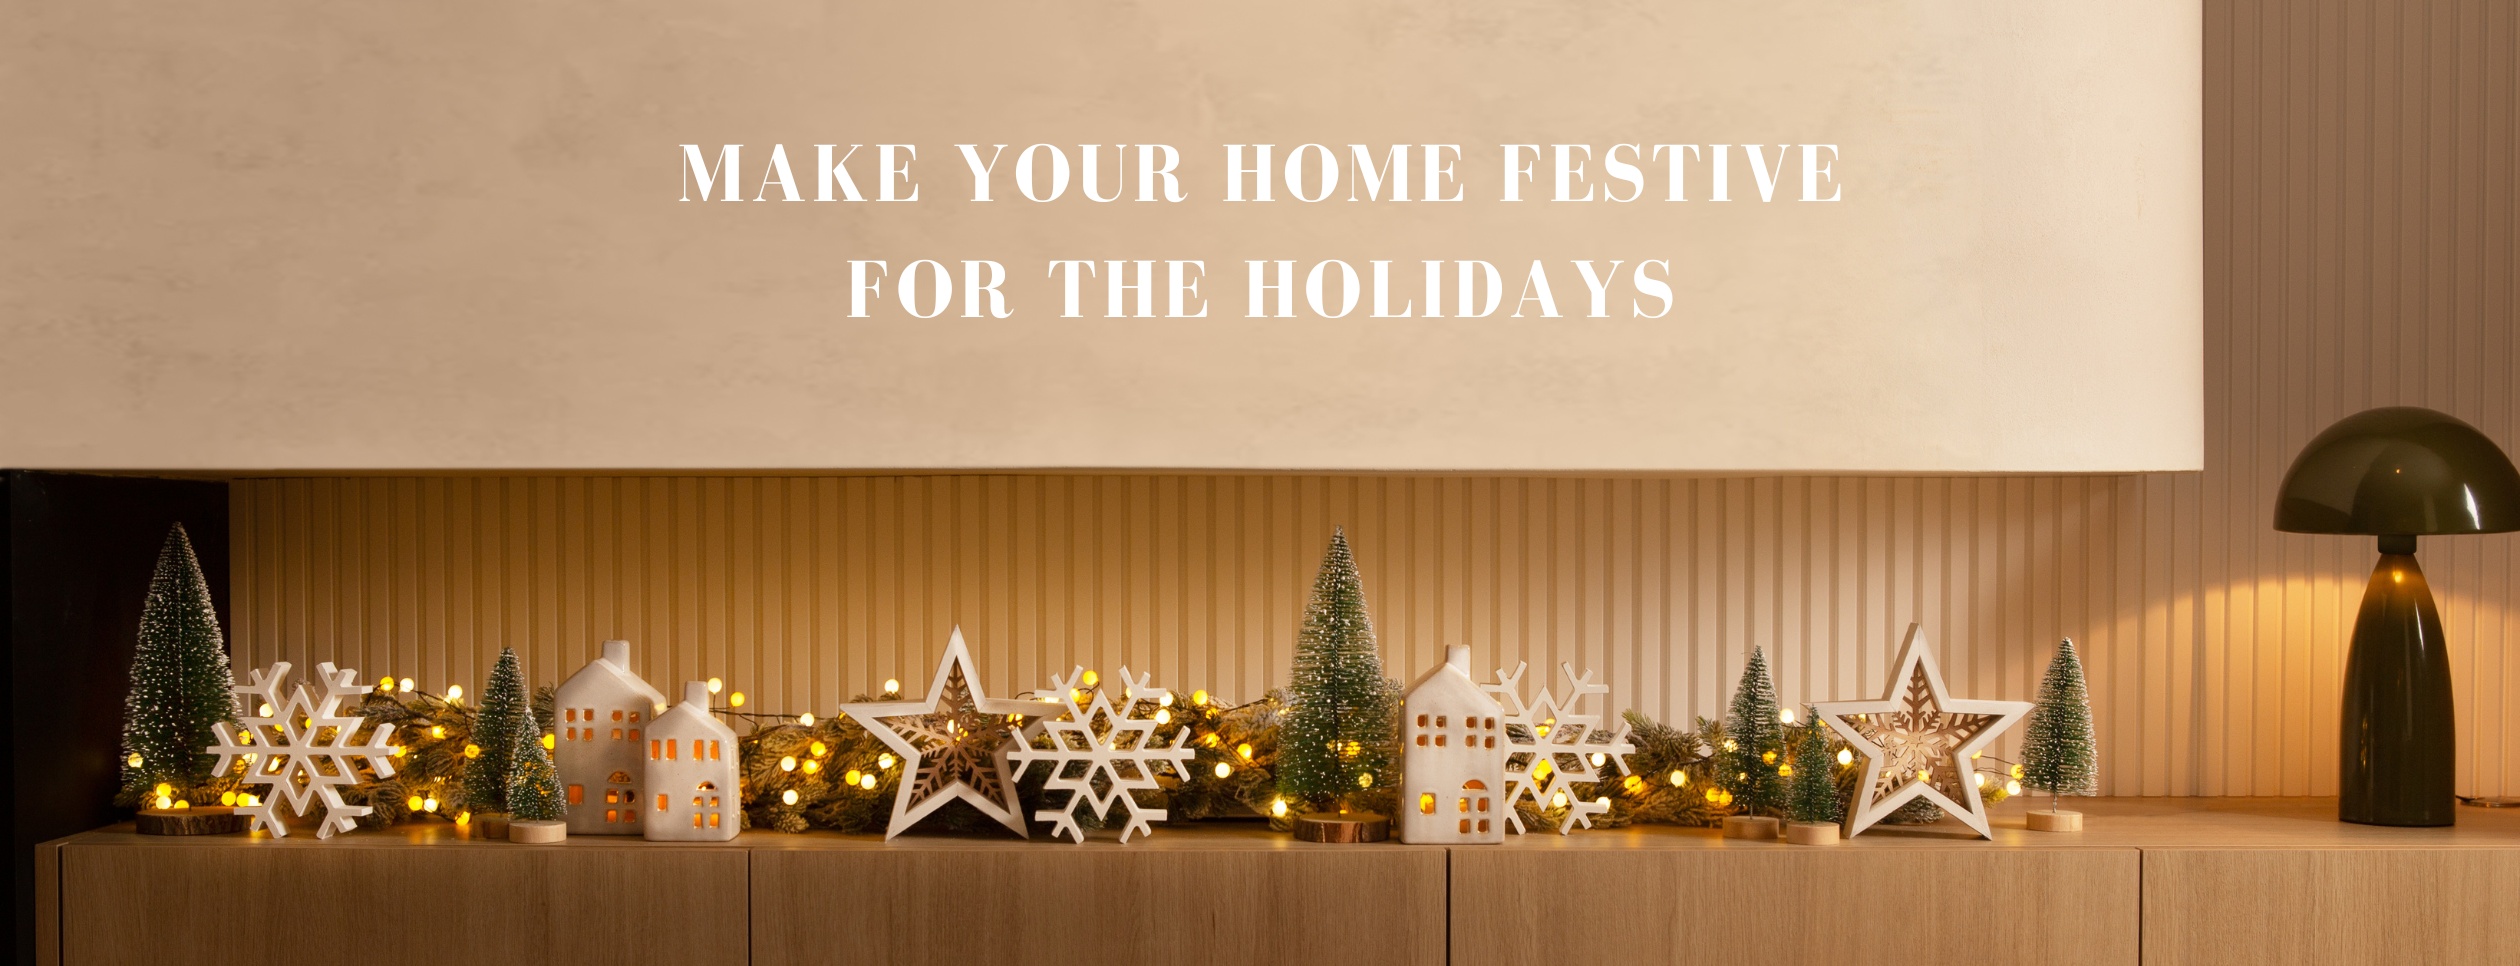 Deck the halls for the holiday season with Zone.